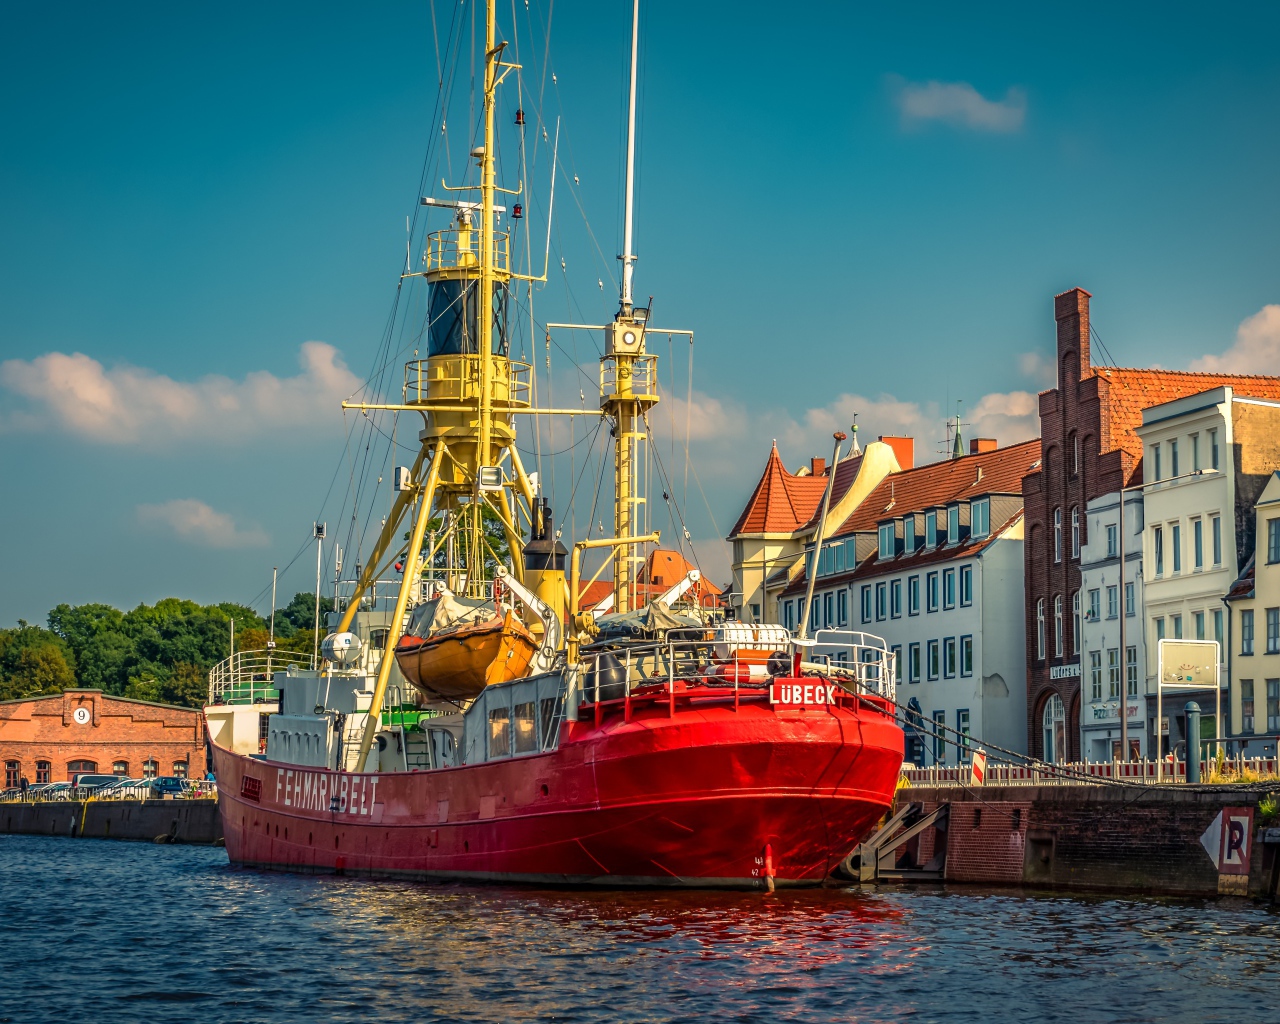 The ship fehmarnbelt in the port of Lubeck